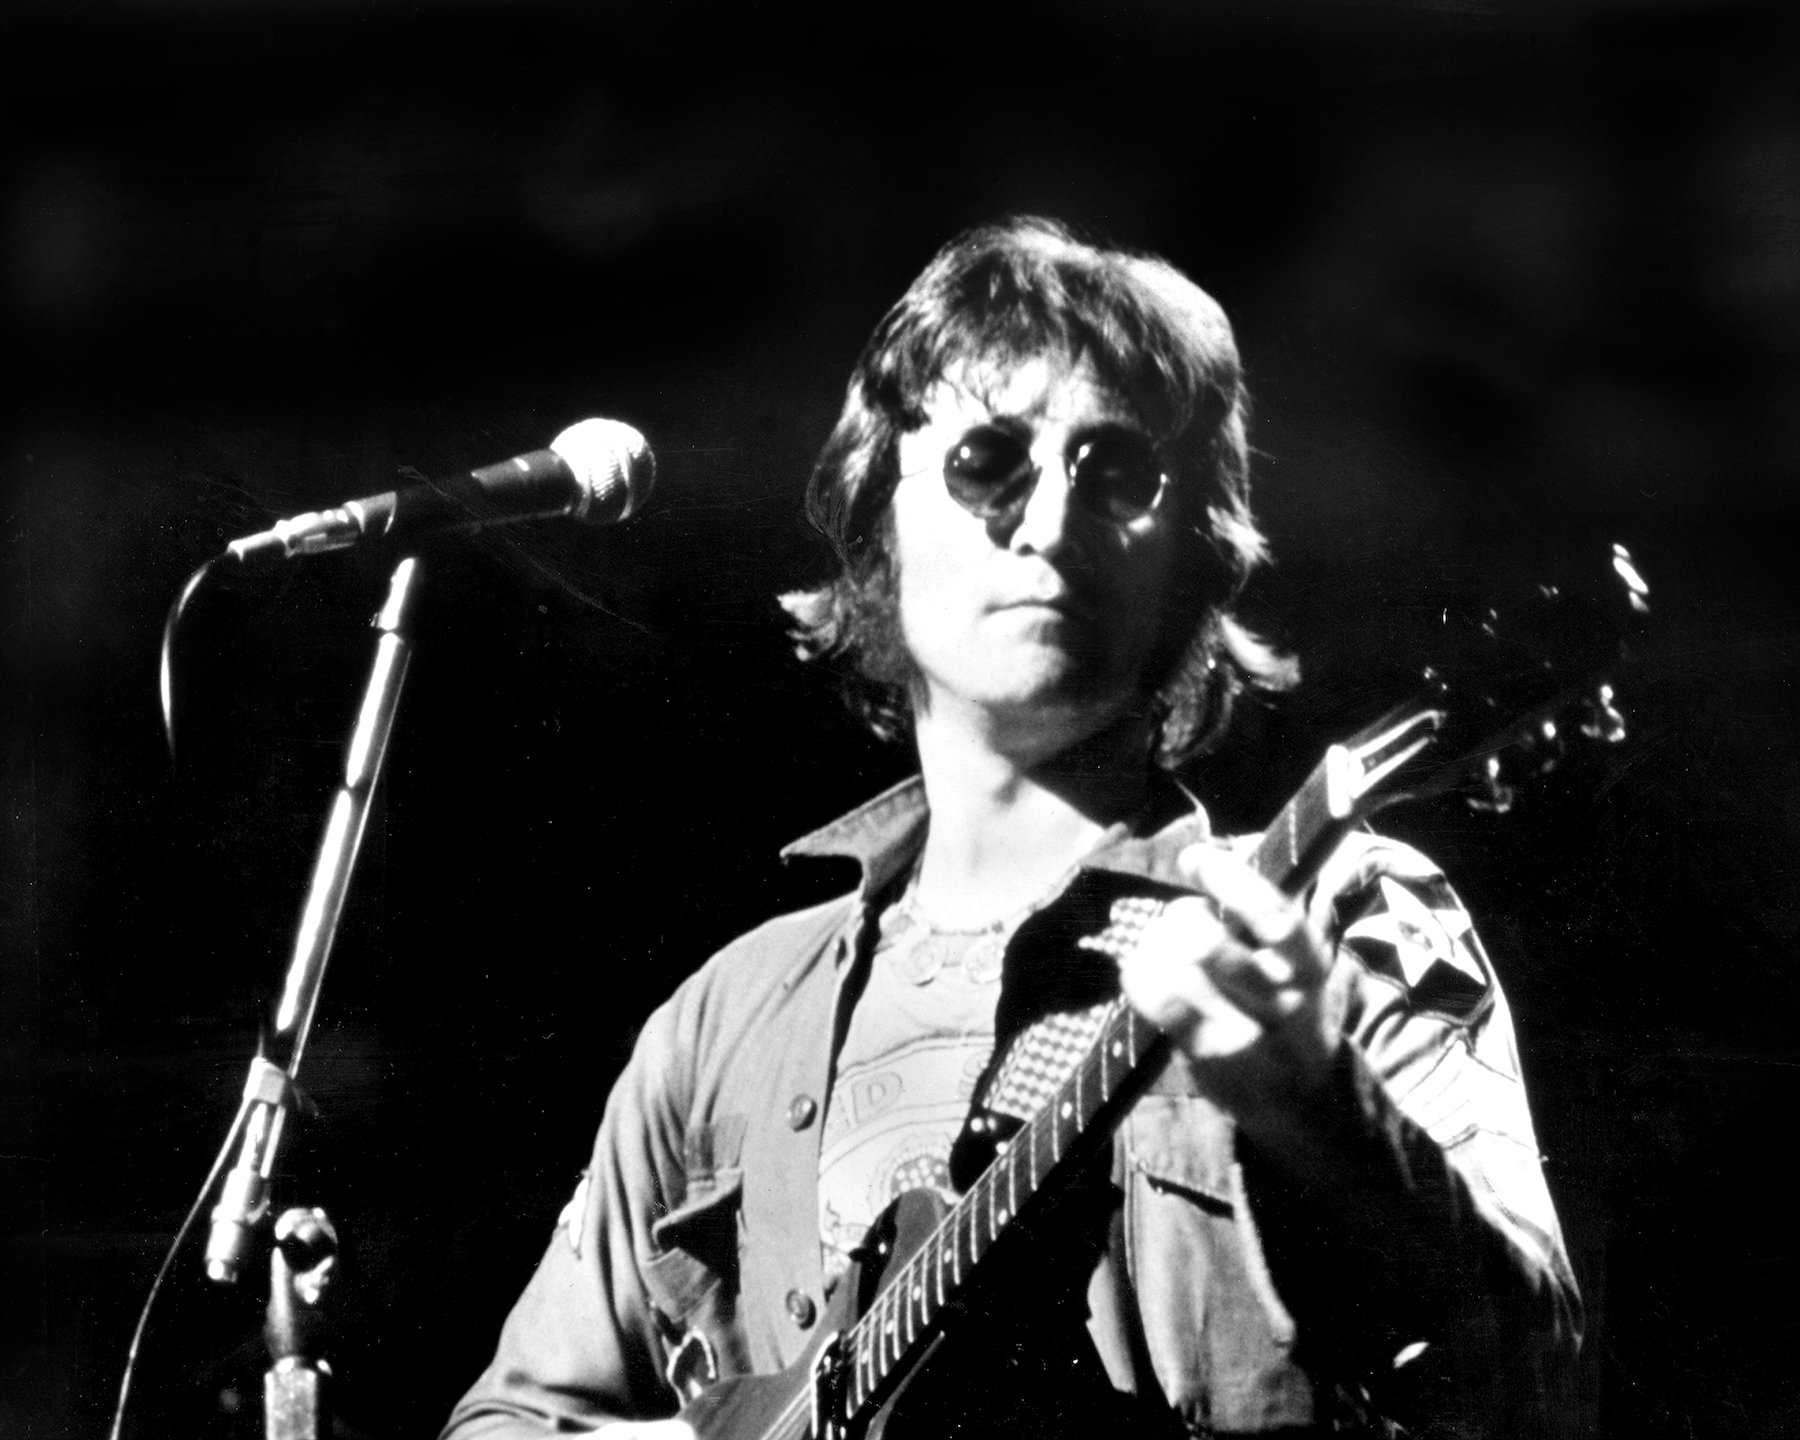 John Lennon, whose father was absent much of his life, playing guitar